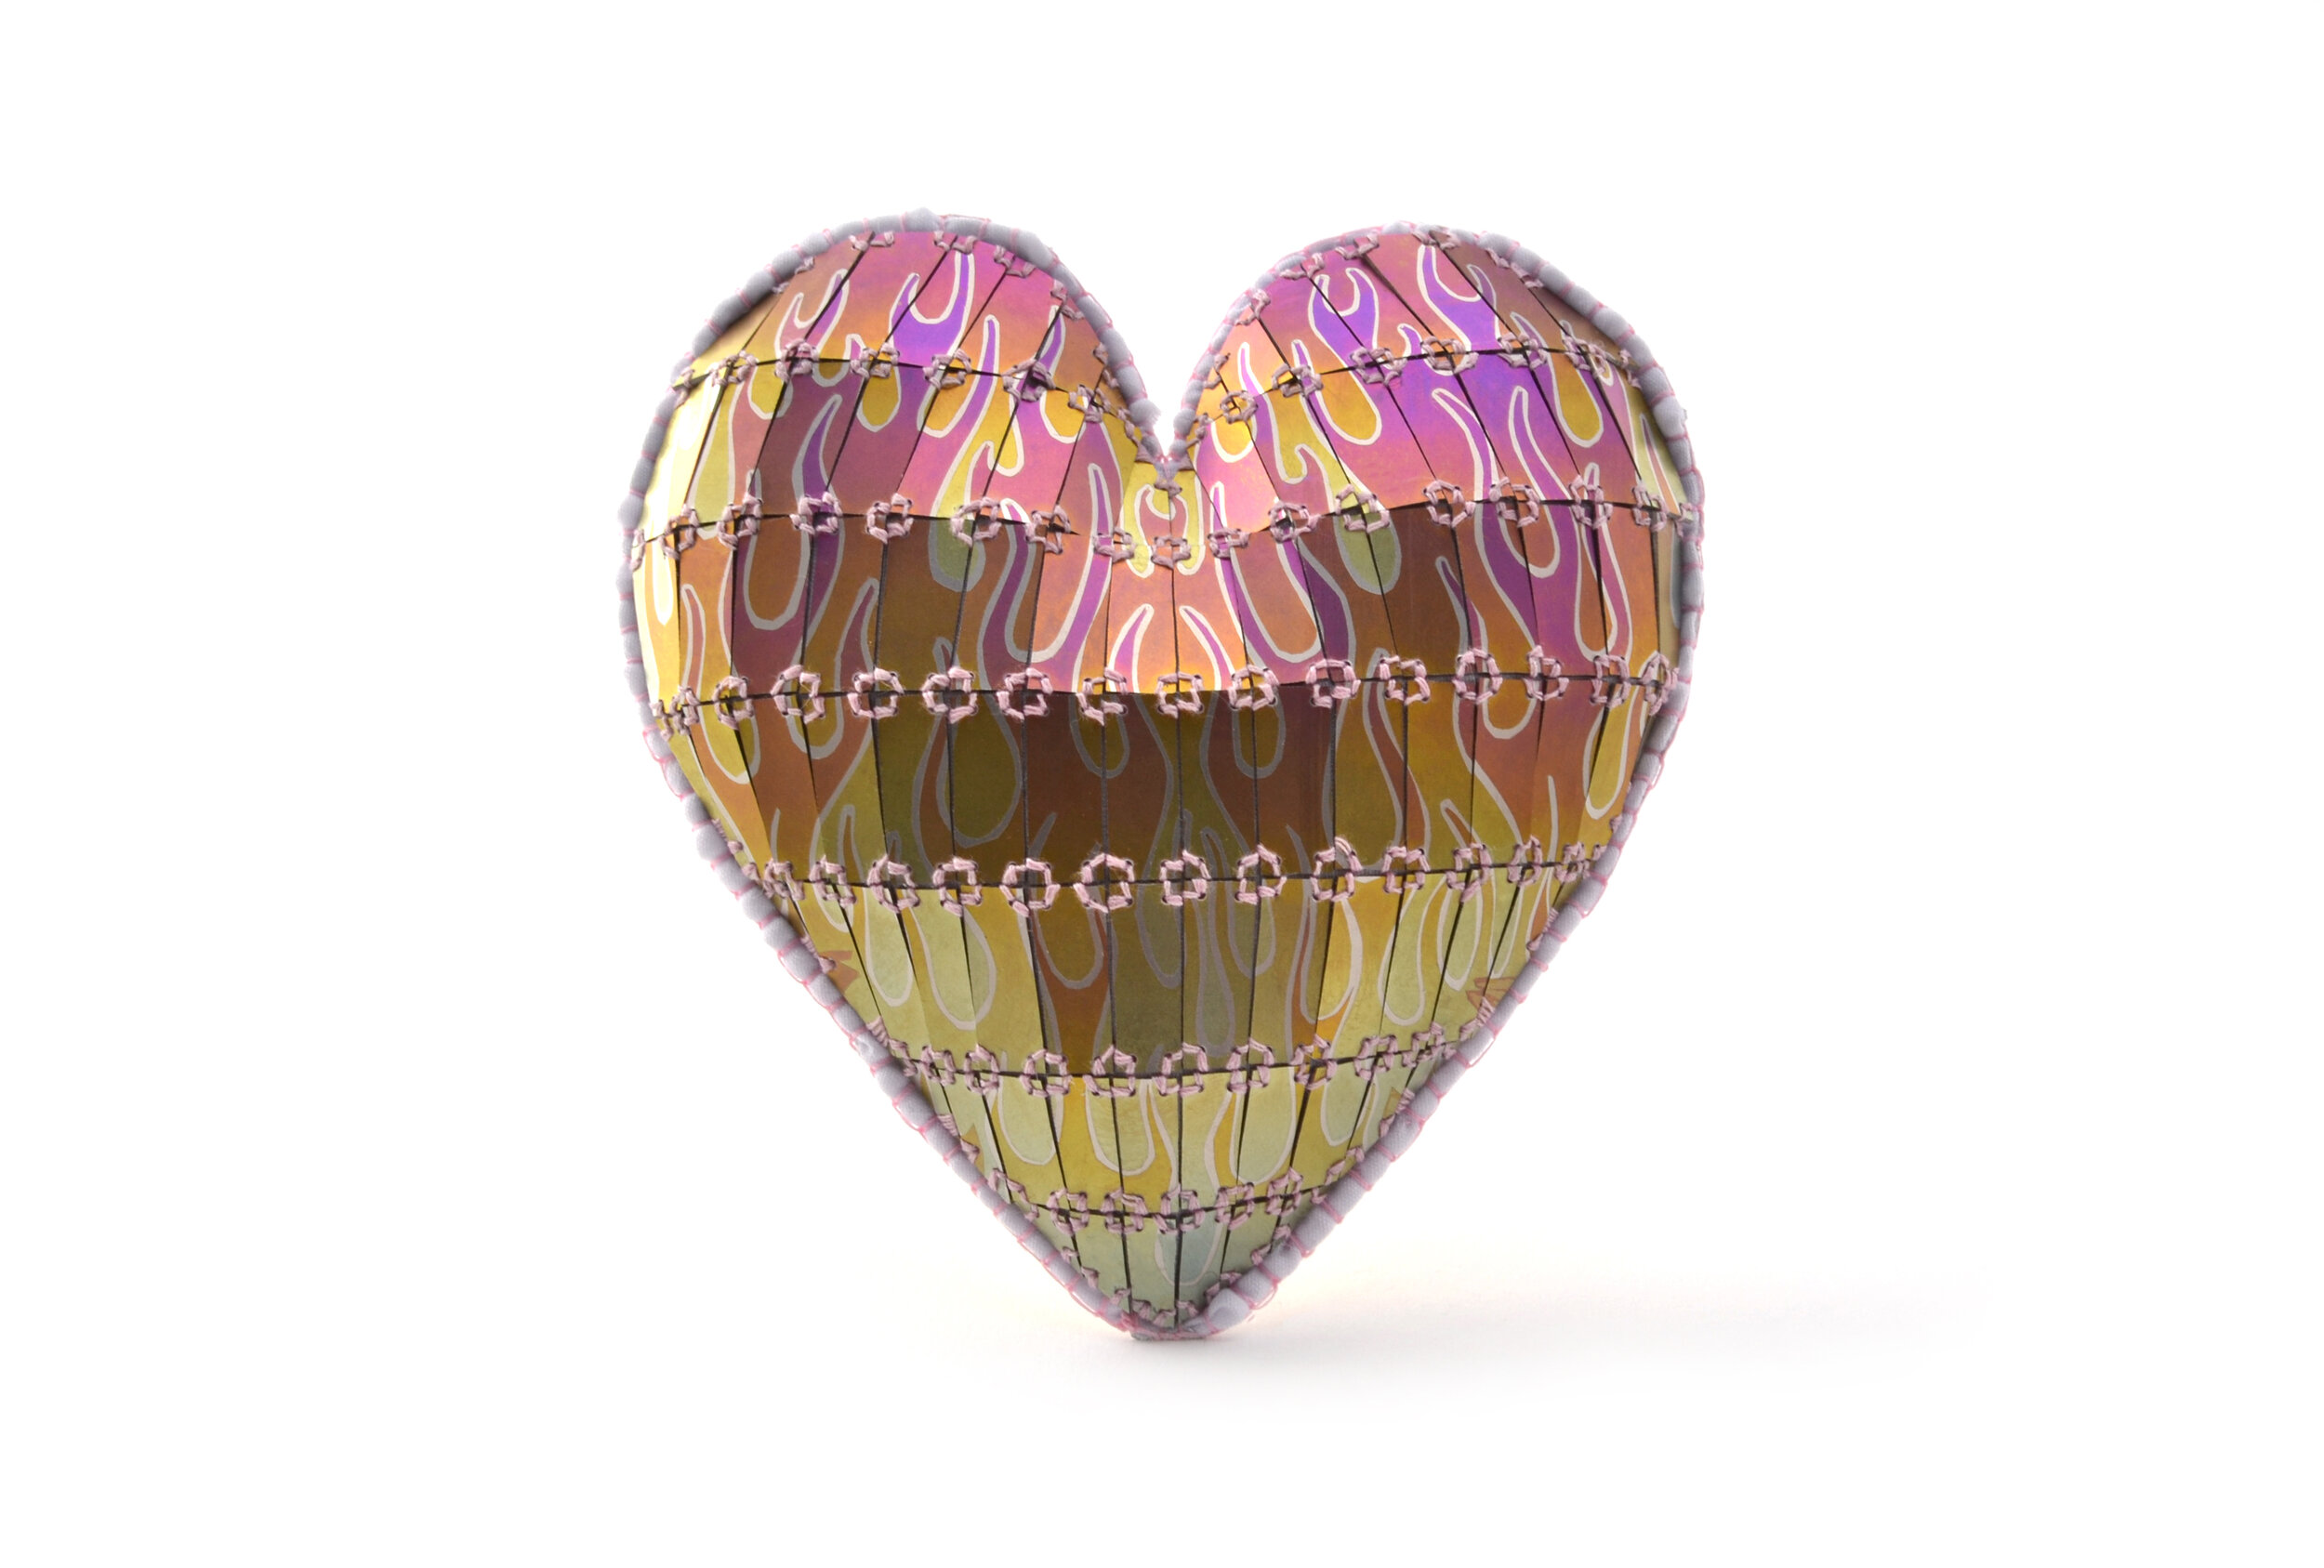   Flaming Heart   Anodized Titanium, Powder-Coated Brass, Polyester, Leather, Cotton, Thread  6”x6”x3”  2019 